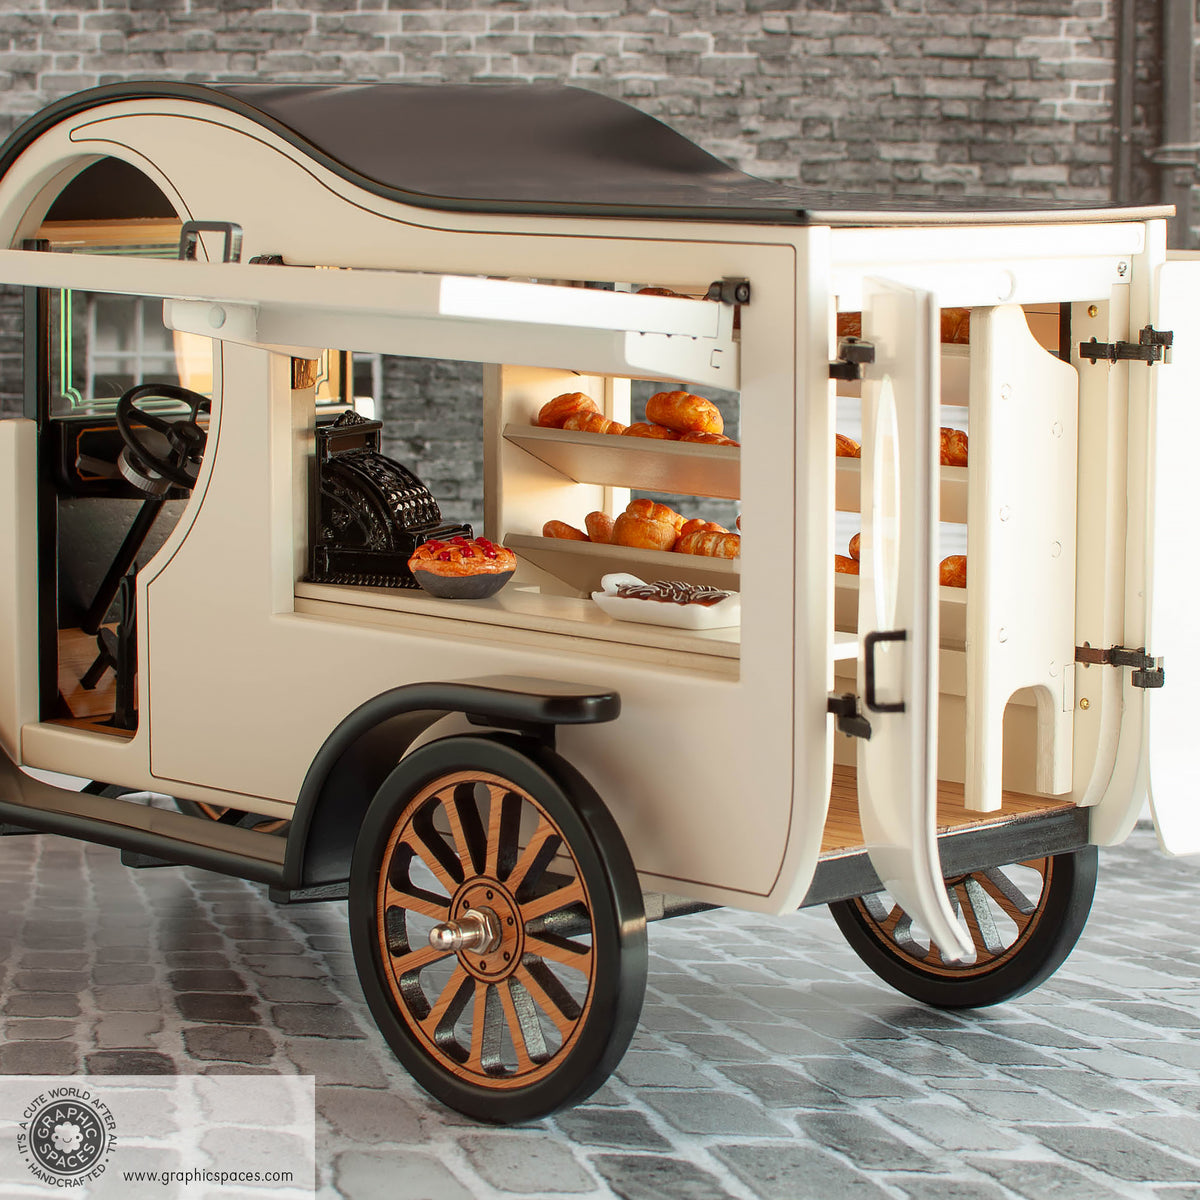 1:12 Scale Room Box White Bakery Shop Truck Model T C Cab. Side rear view showing partial Counter and Shelves. Open doors. 